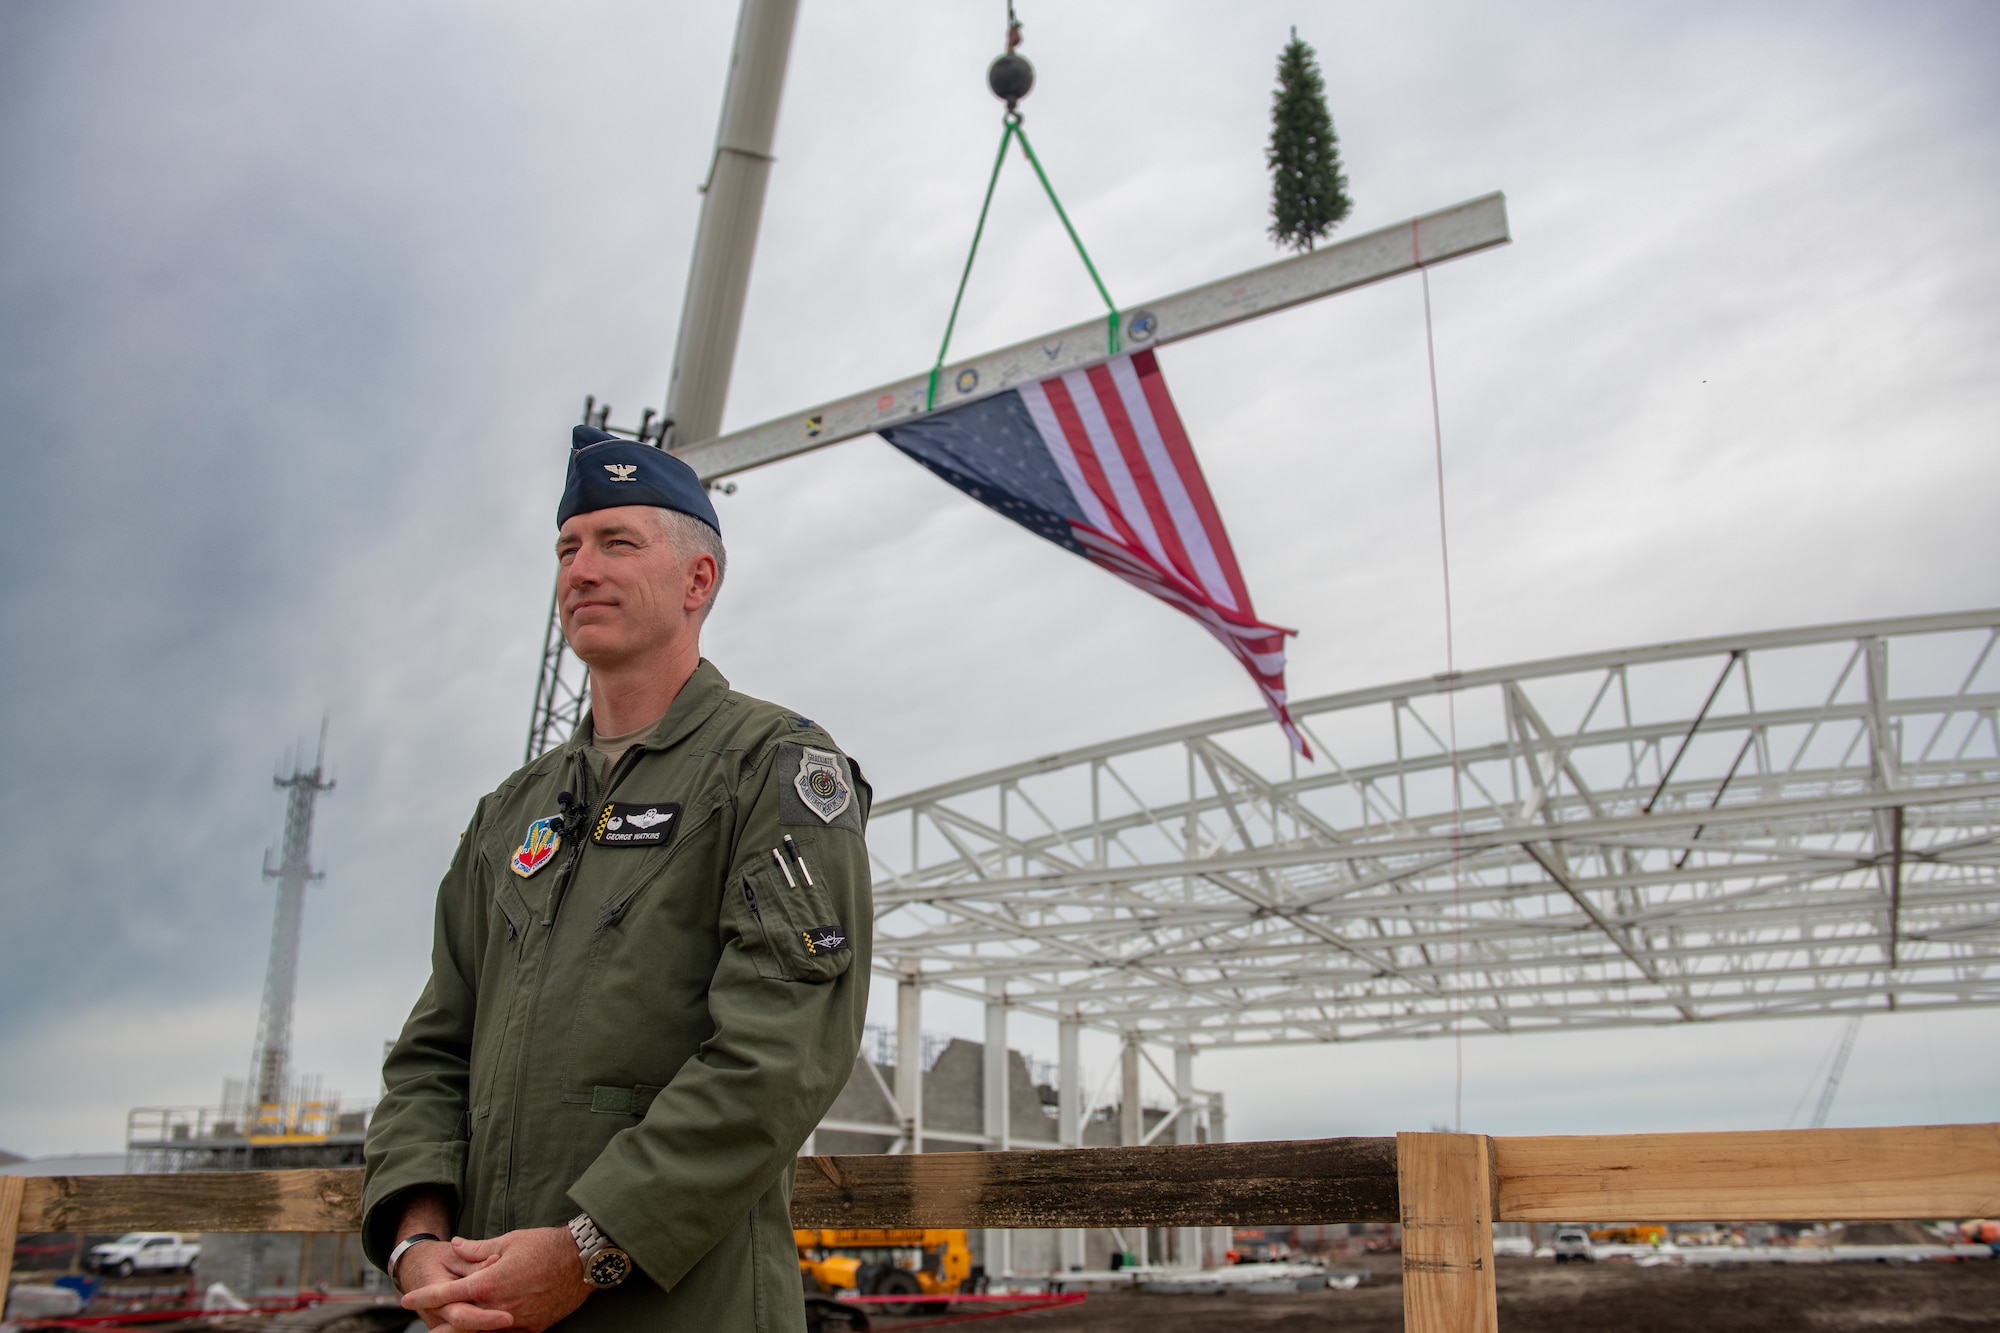 Man in military uniform stands in front of American flag on a construction site.